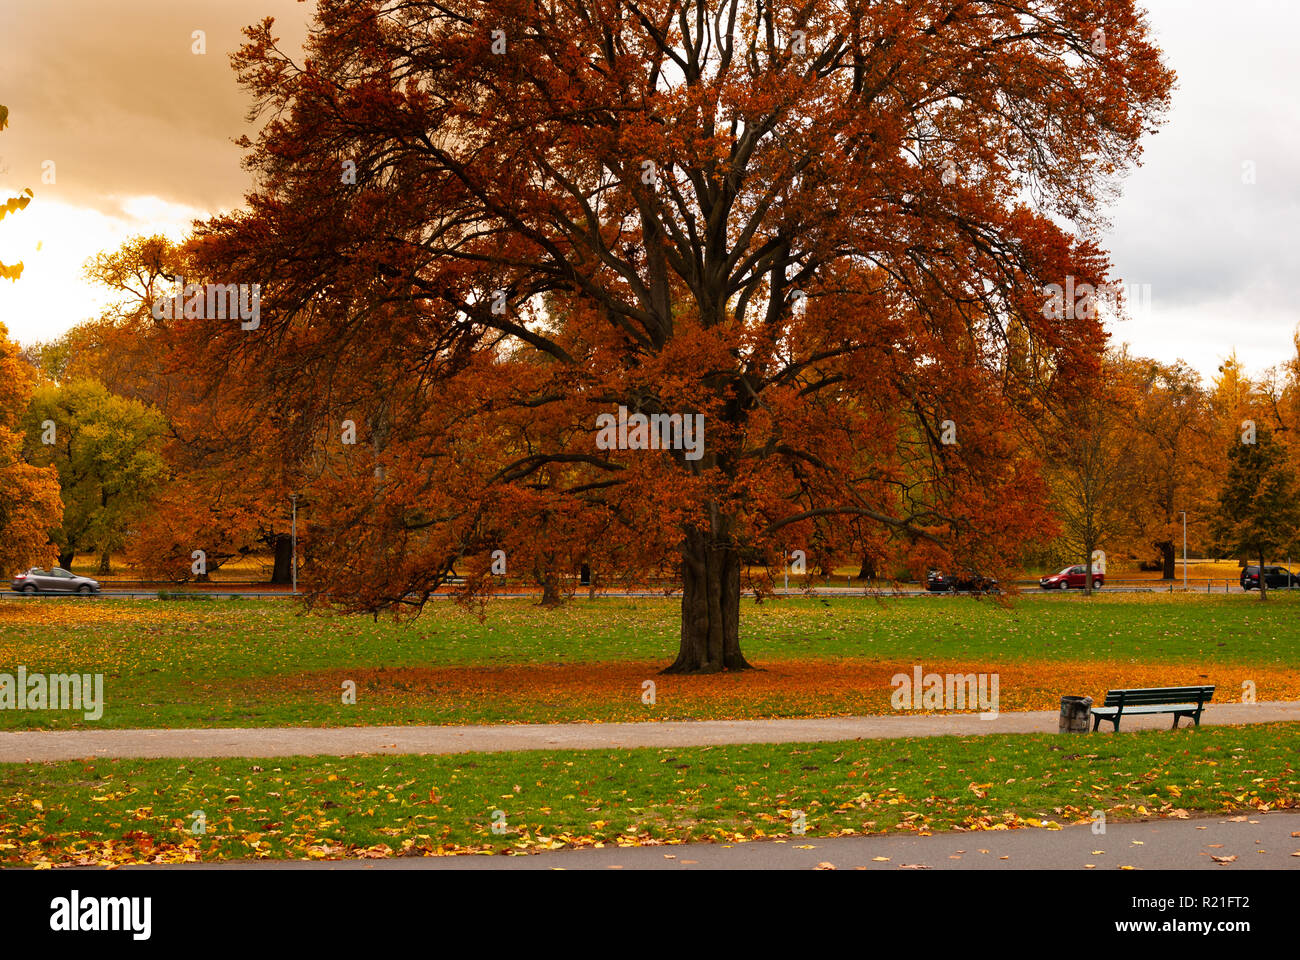 A Big Tree With Red Leaves In Autumn On A Green Field Stock Photo Alamy